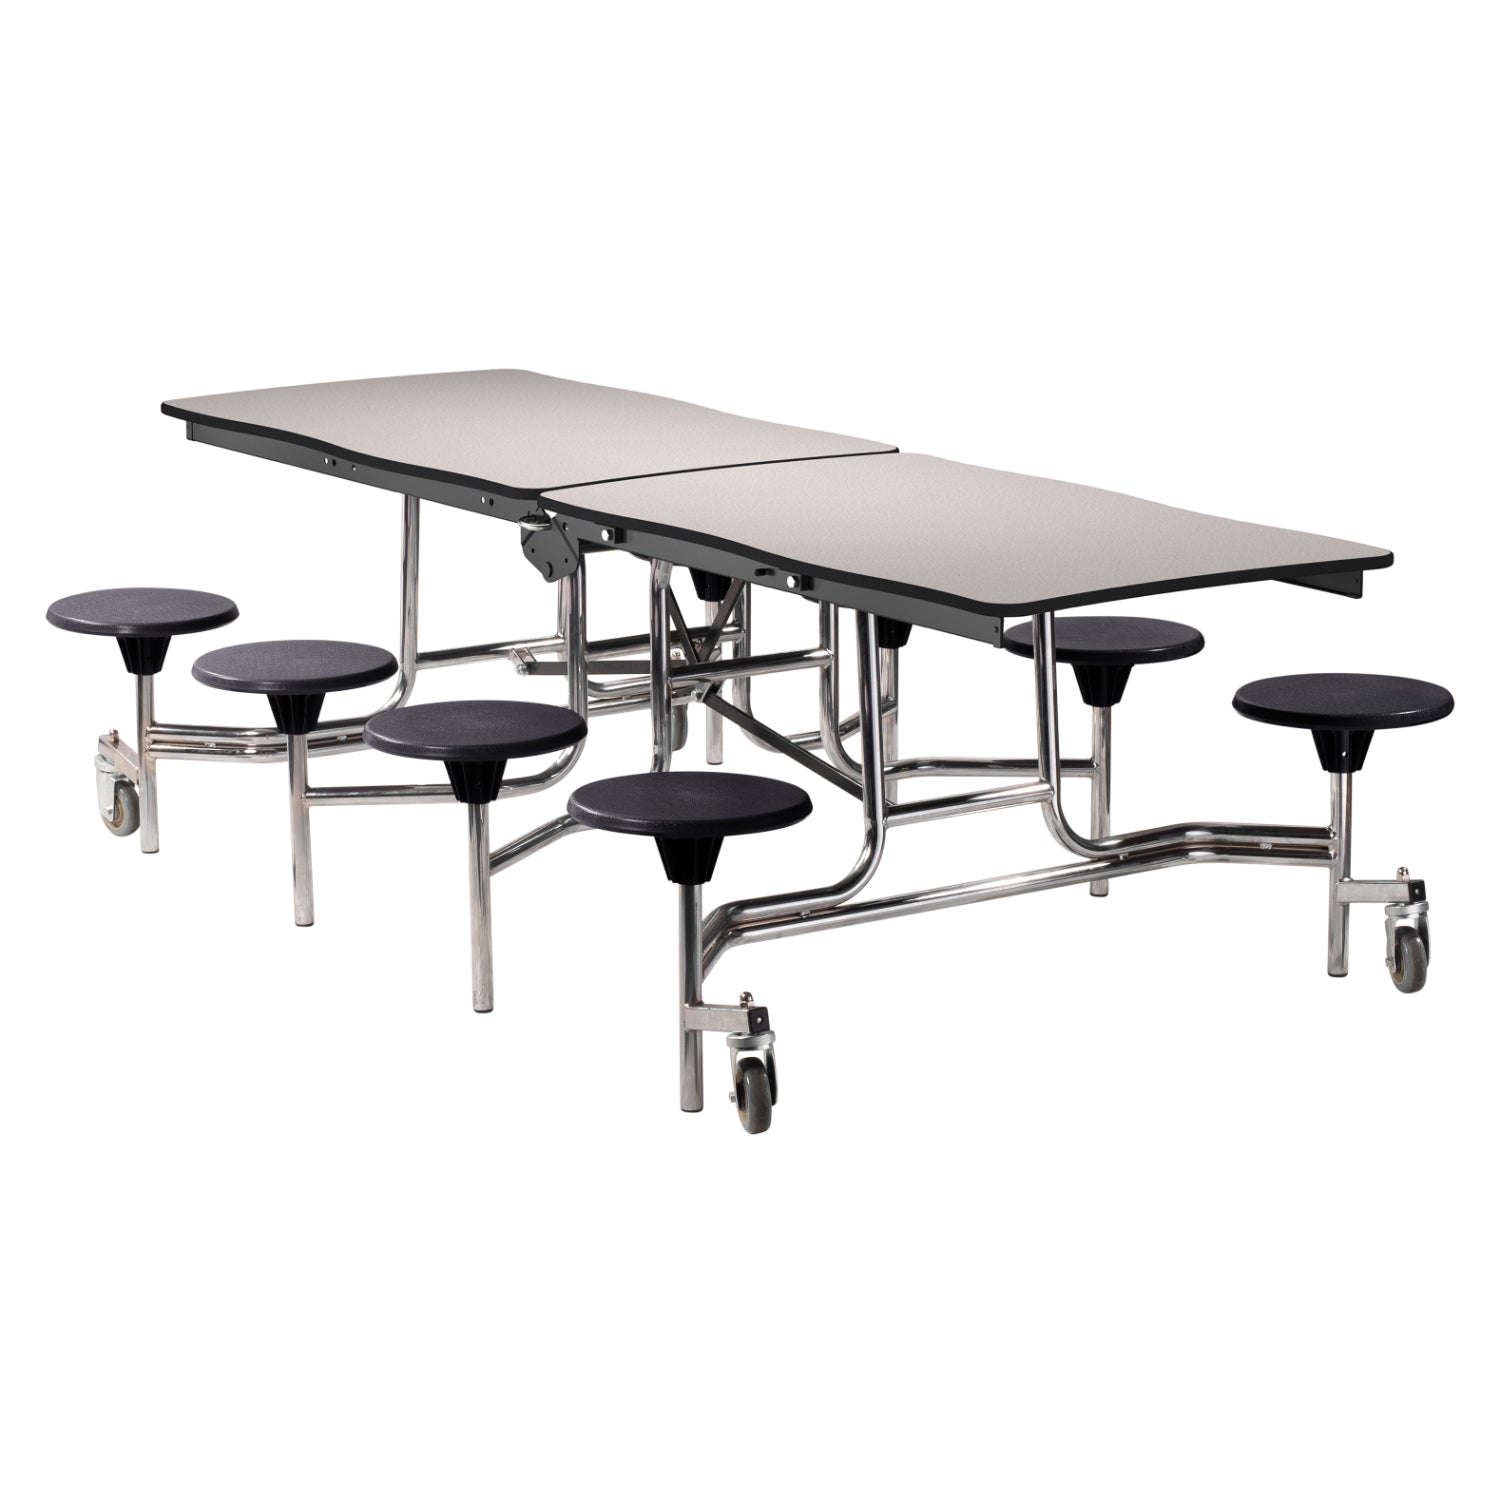 Mobile Cafeteria Table with 8 Stools, 8' Swerve, Plywood Core, Vinyl T-Mold Edge, Chrome Frame